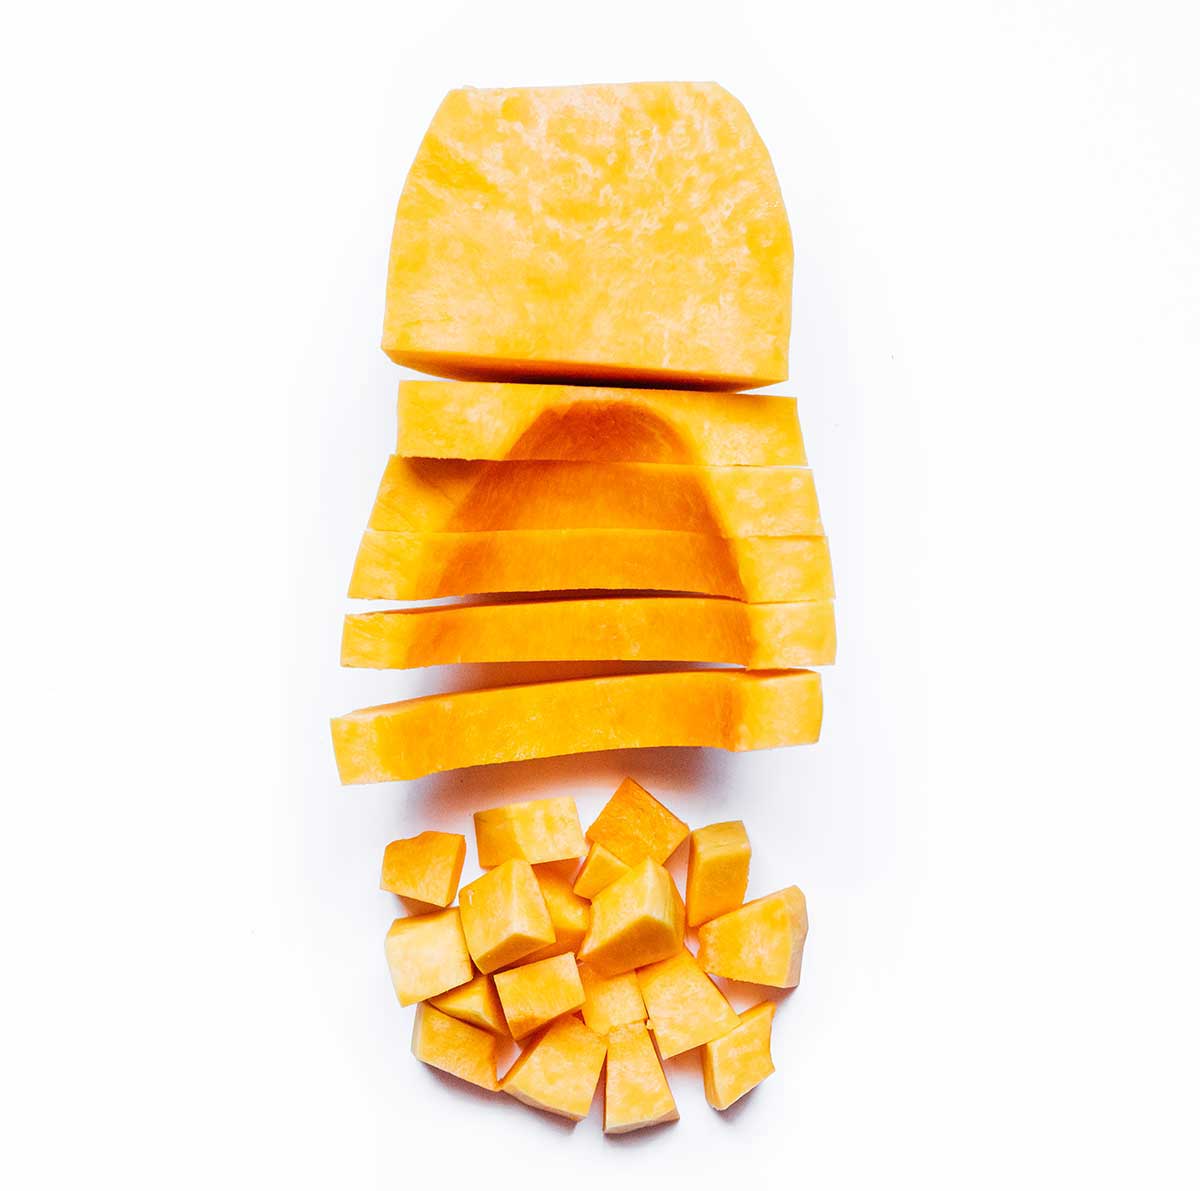 How to cut a butternut squash on a white background